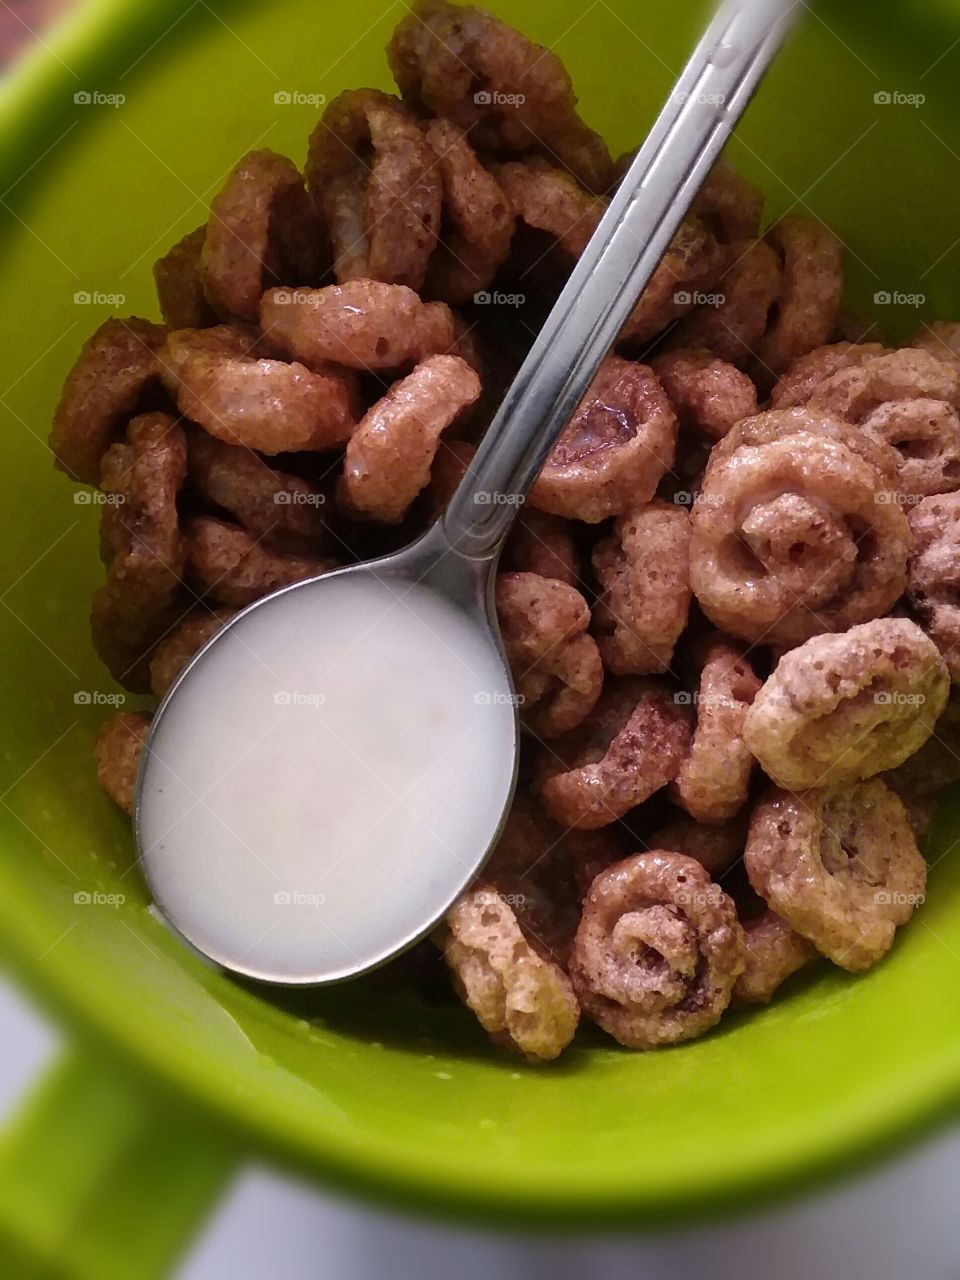 Cereal and Milk